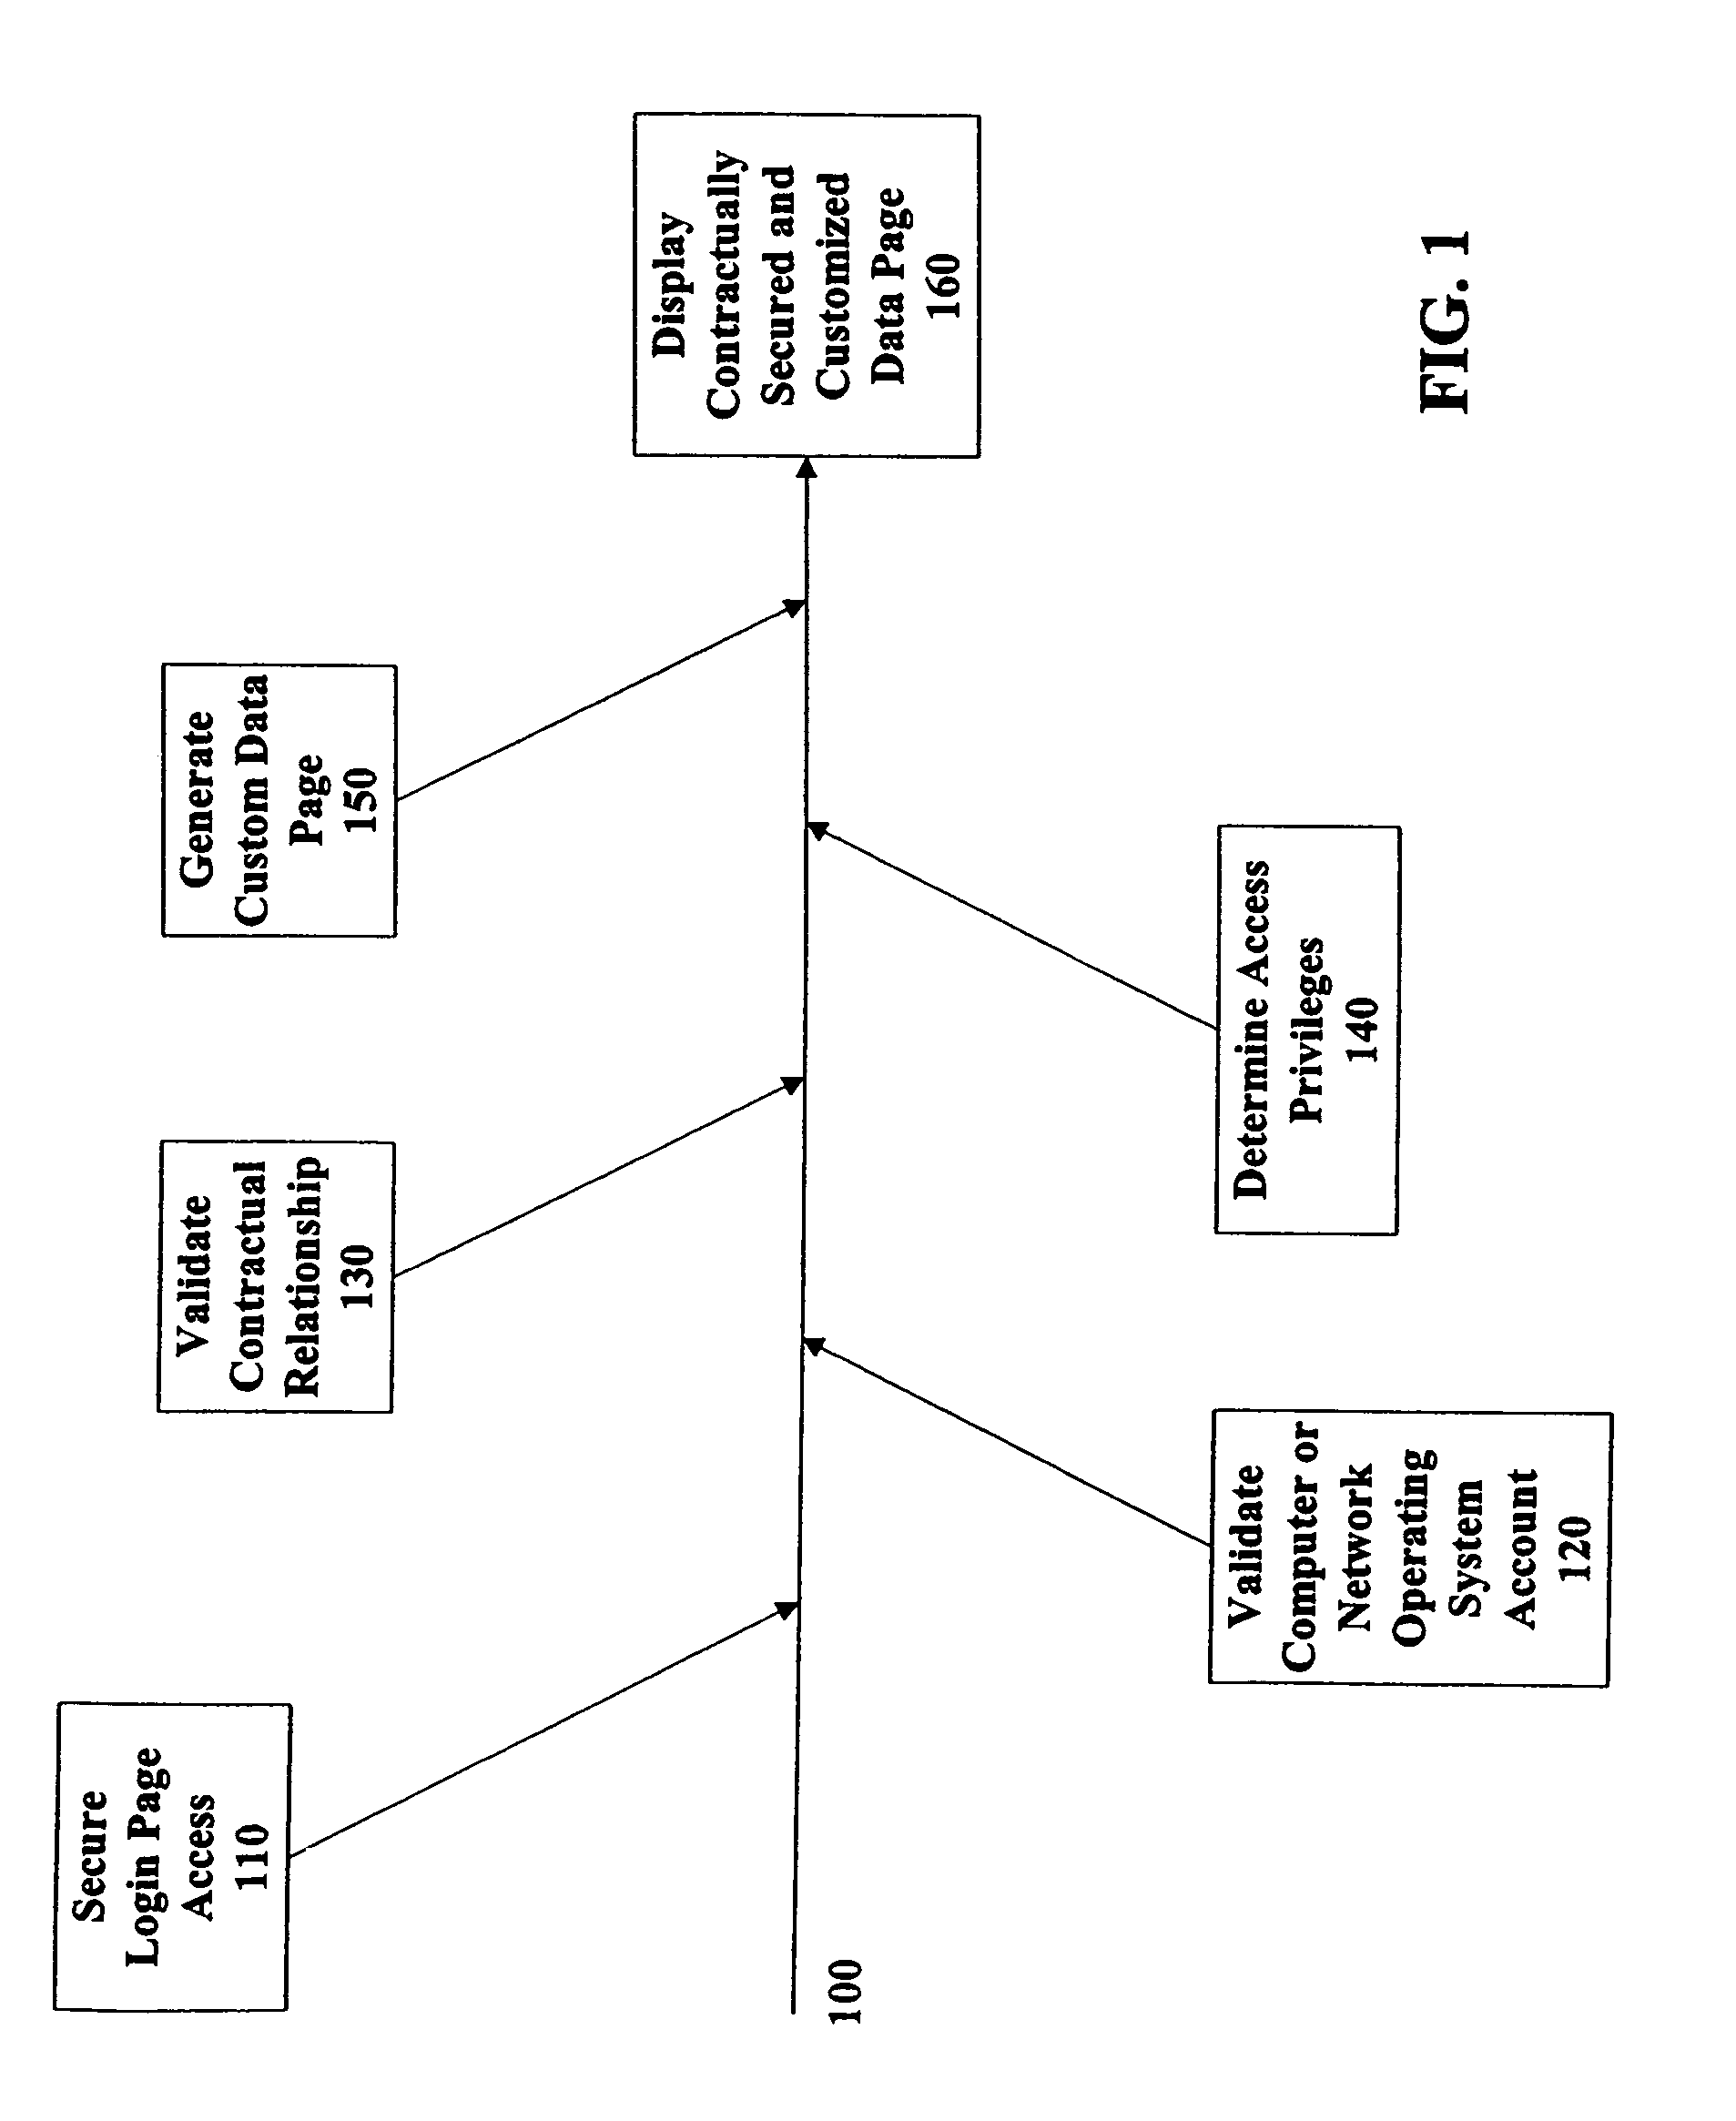 Method and system for user authentication and authorization of services